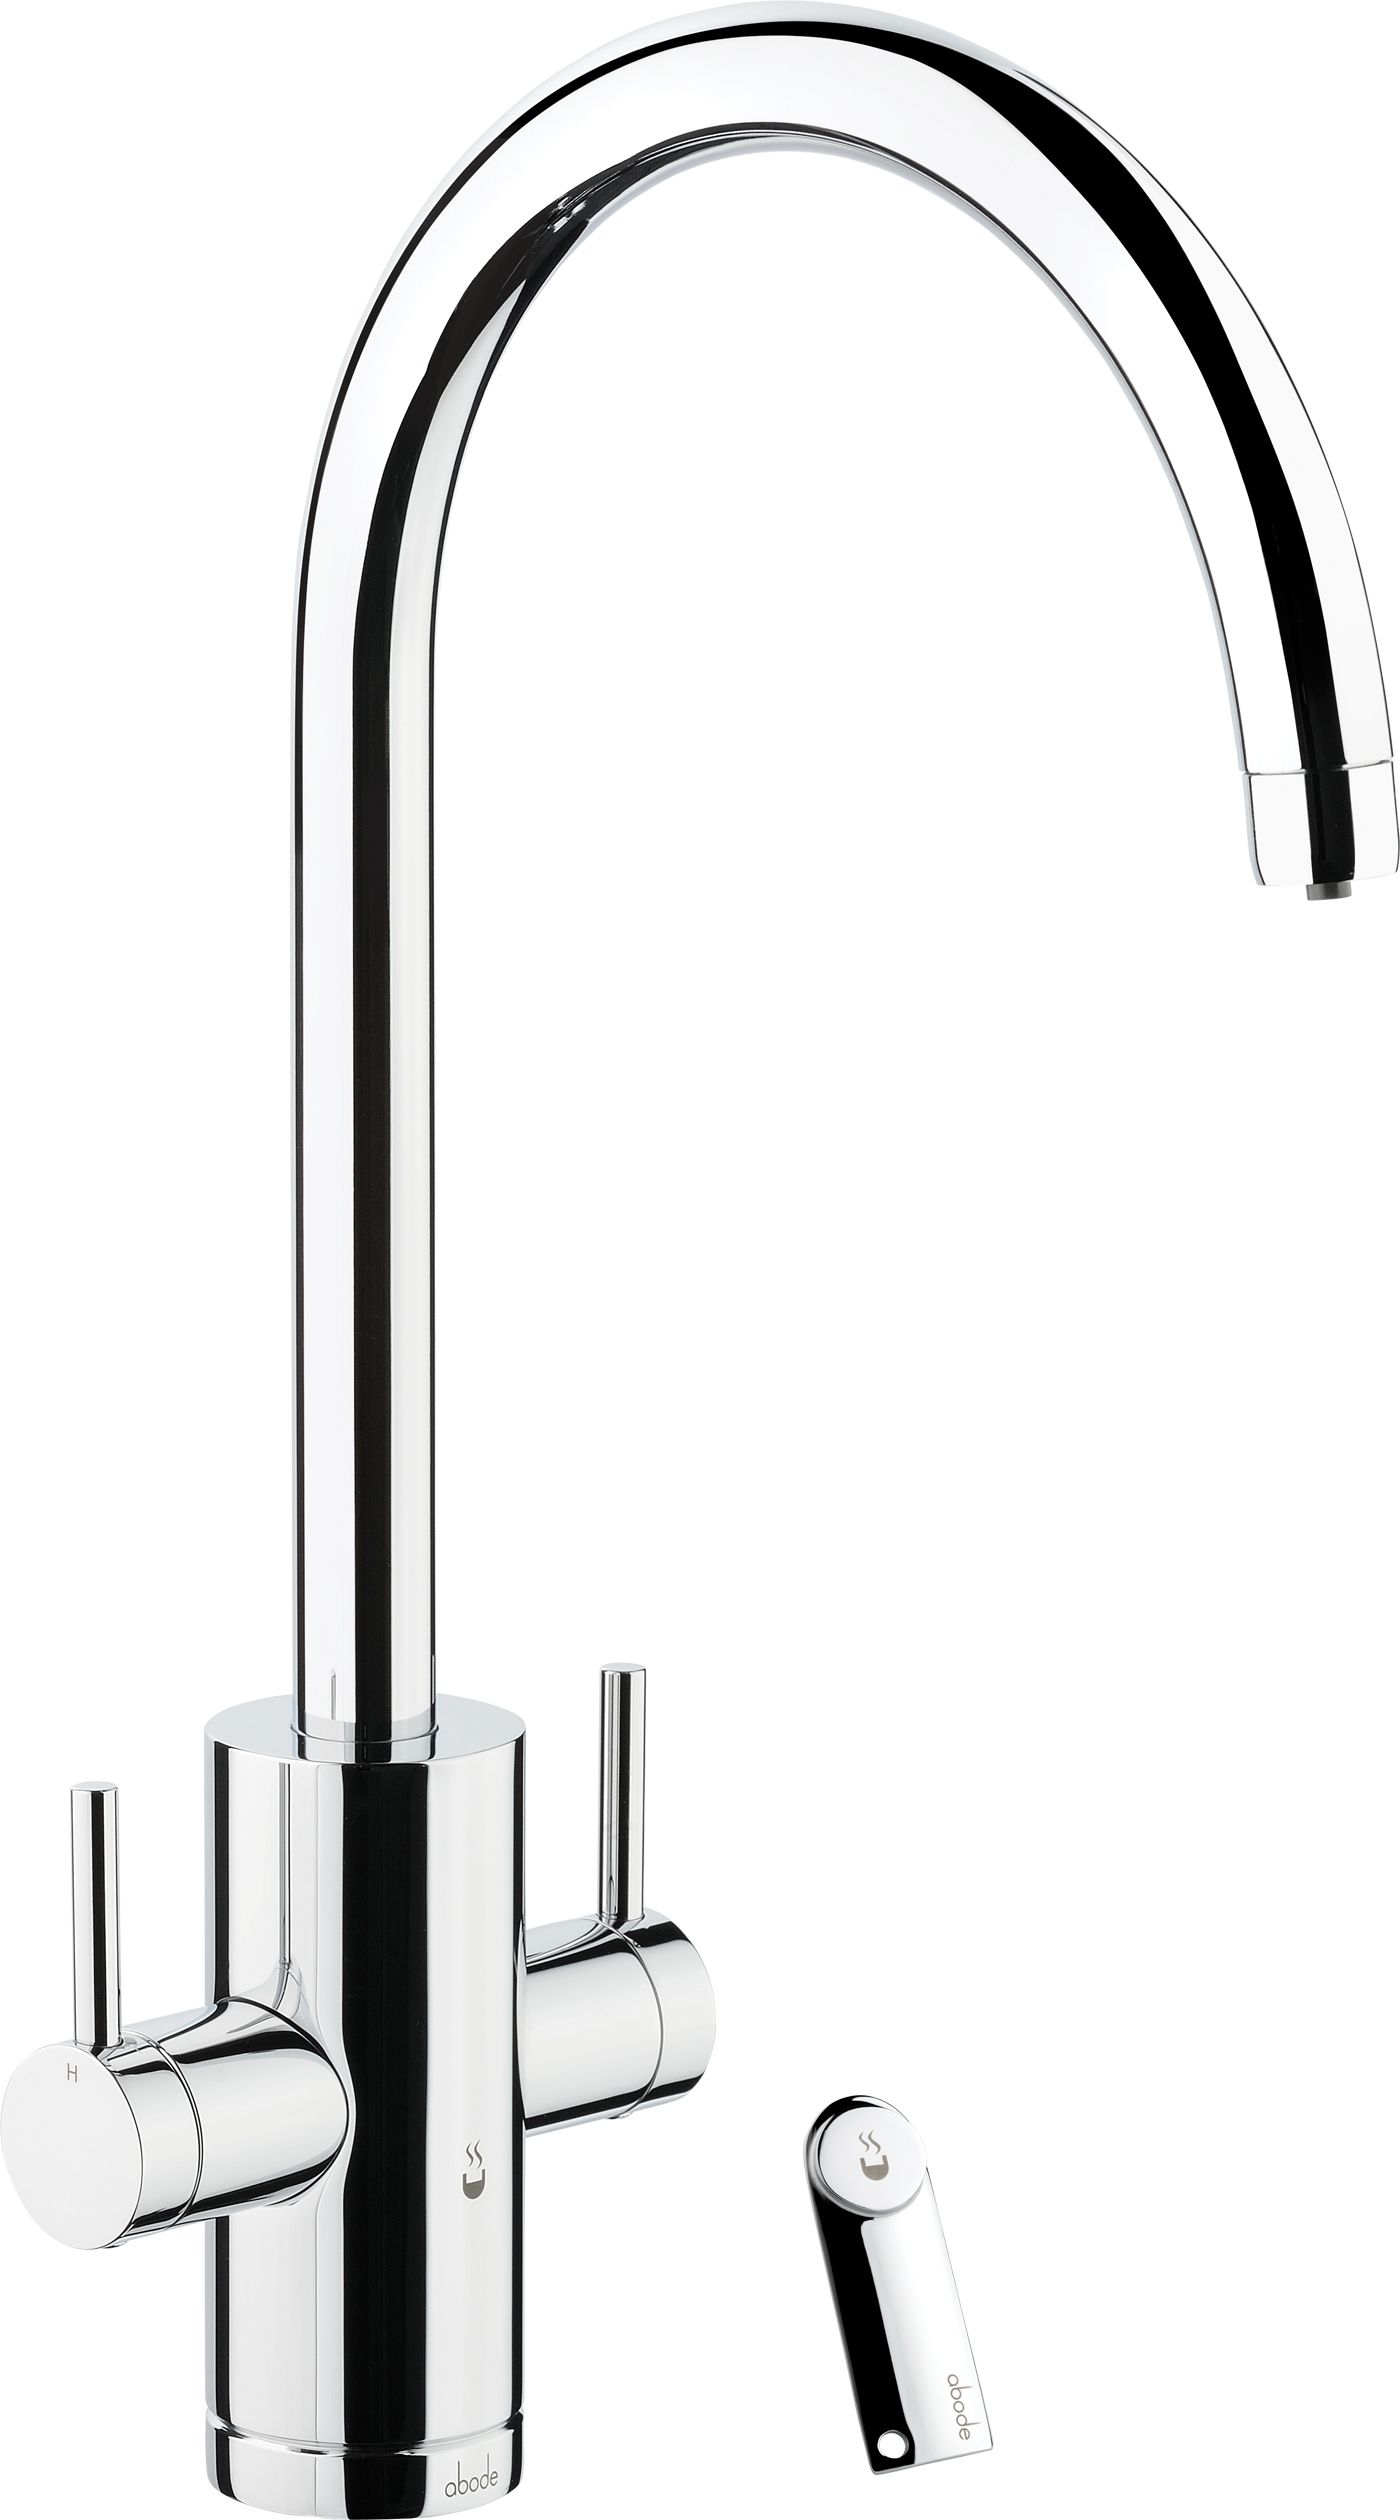 Image of Abode Profile Monobloc 4 In 1 Hot Water Kitchen Tap with Boiler - Chrome